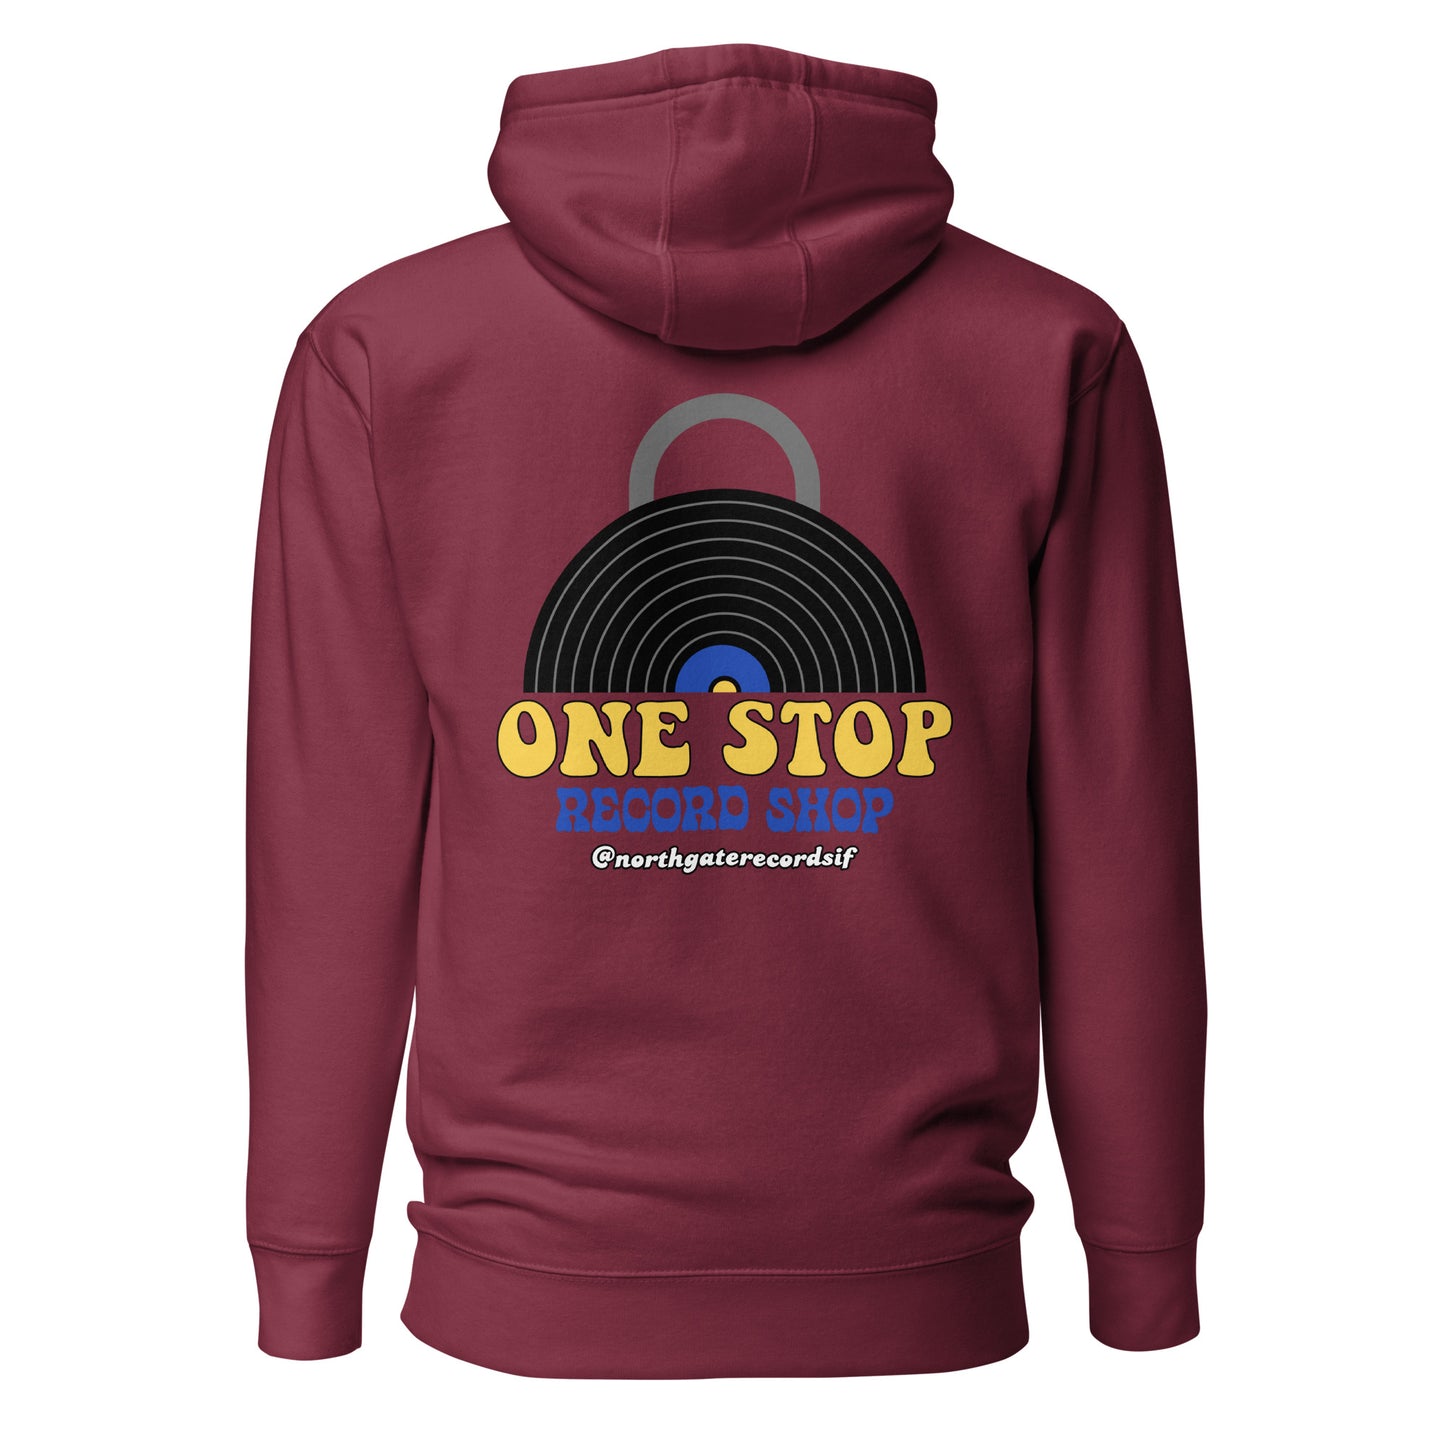 Unisex One Stop Record Shop Hoodie